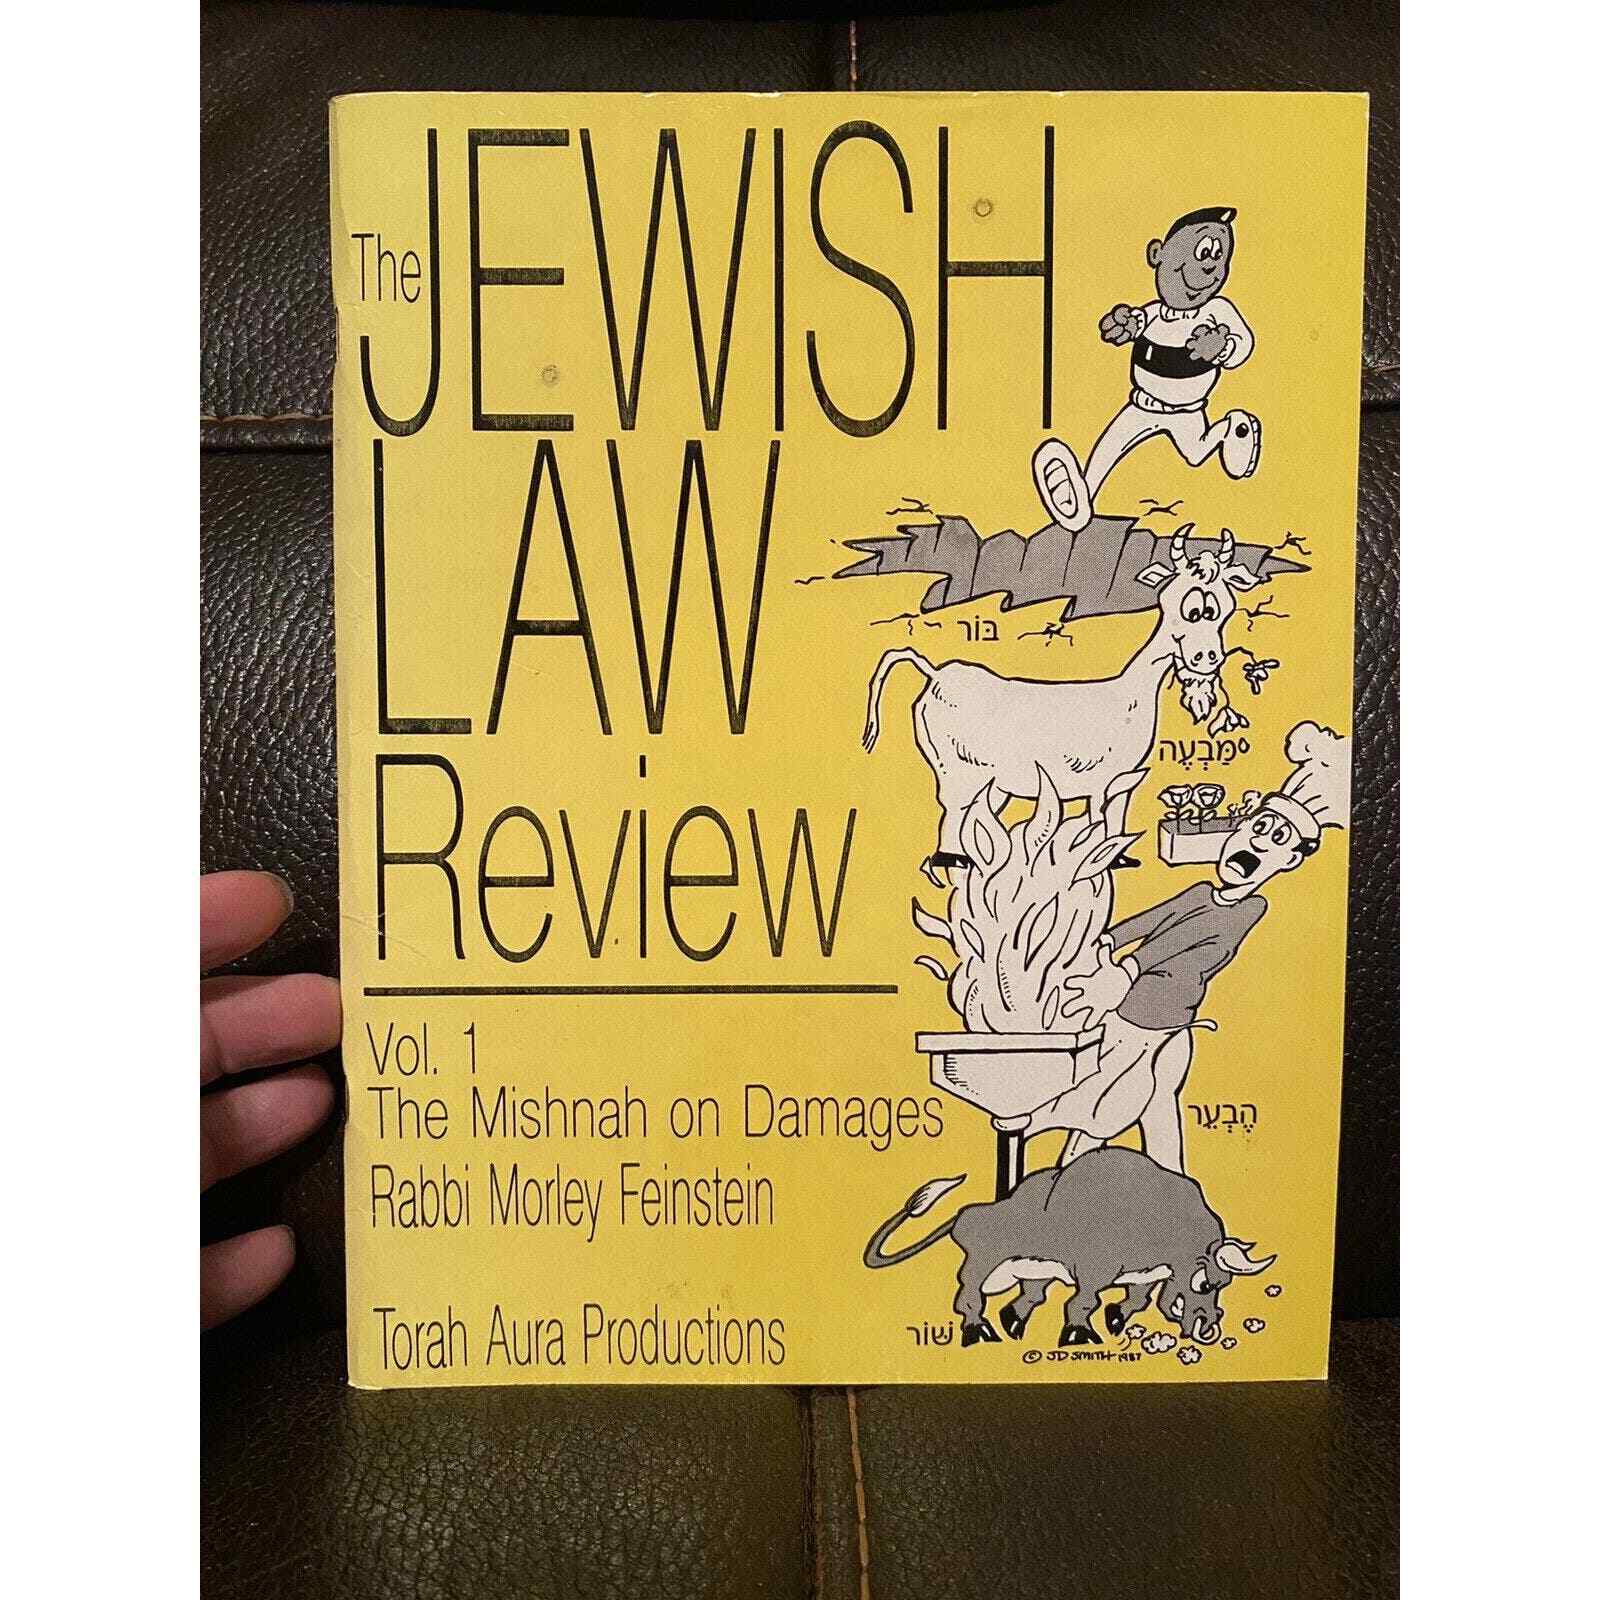 Jewish Law Review Vol. 1 The Mishnah on Damages By Rabbi Morley Feinstein